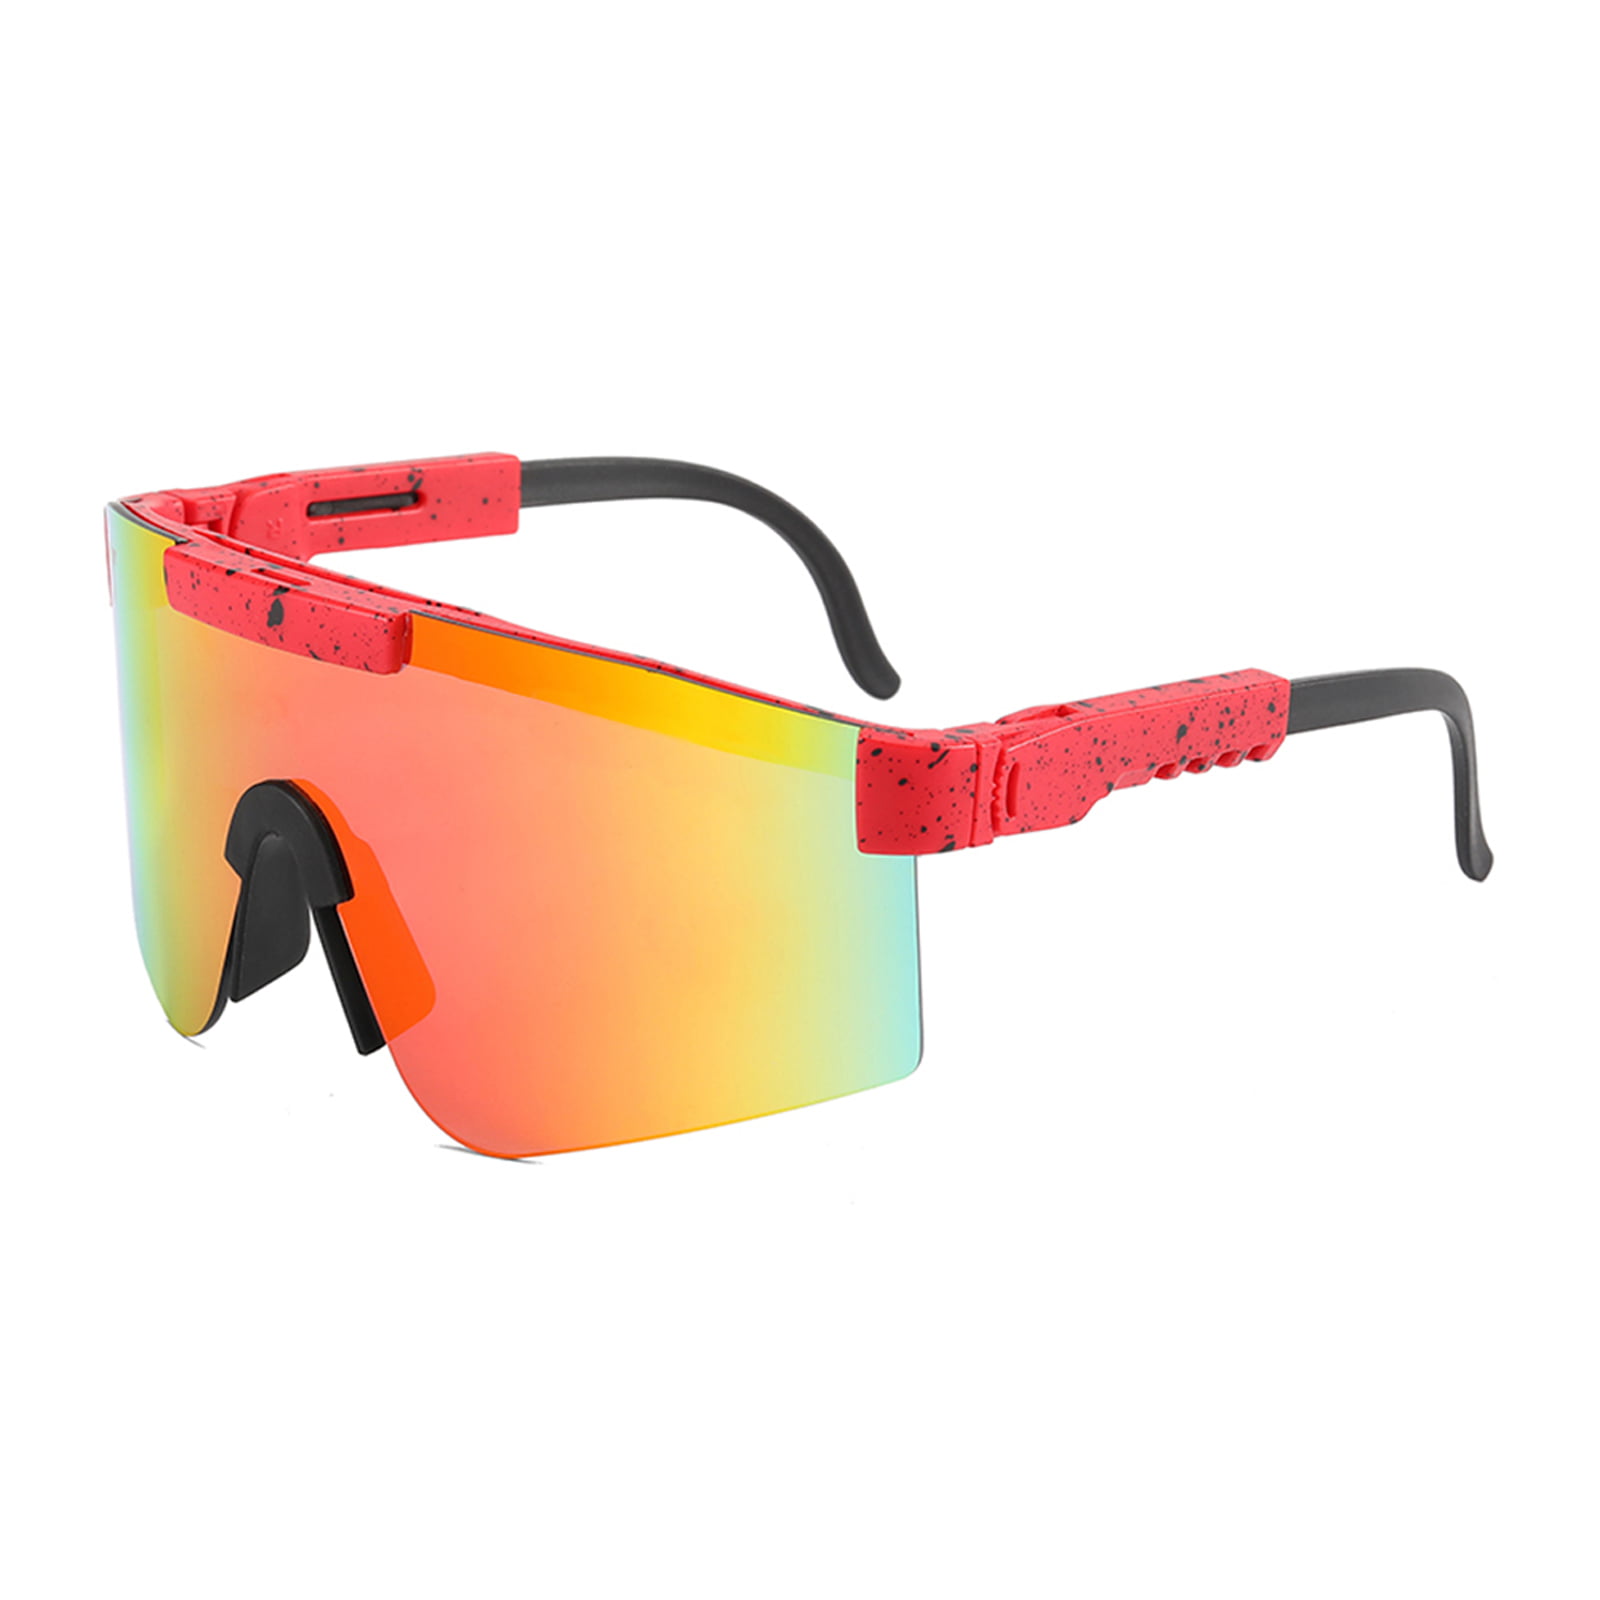 Outdoor Cycling Sport Glasses UV400 Double Wides Polarized Sunglasses Pit Viper Sunglasses 